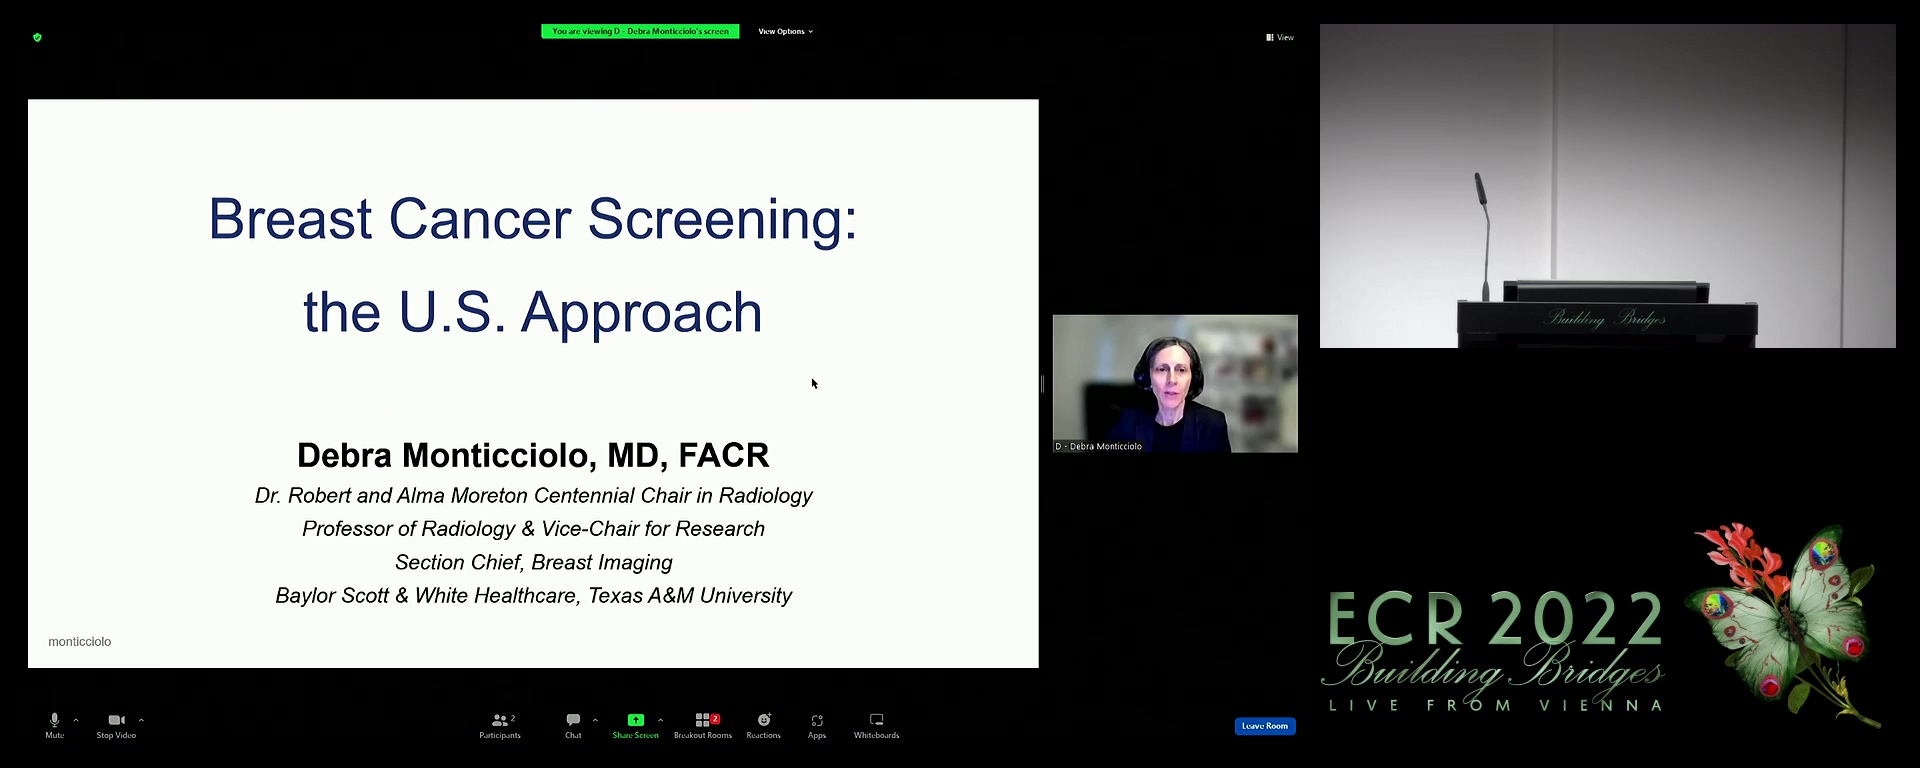 B. Screening in the US and how risk strategies for screening differ between the US and Europe